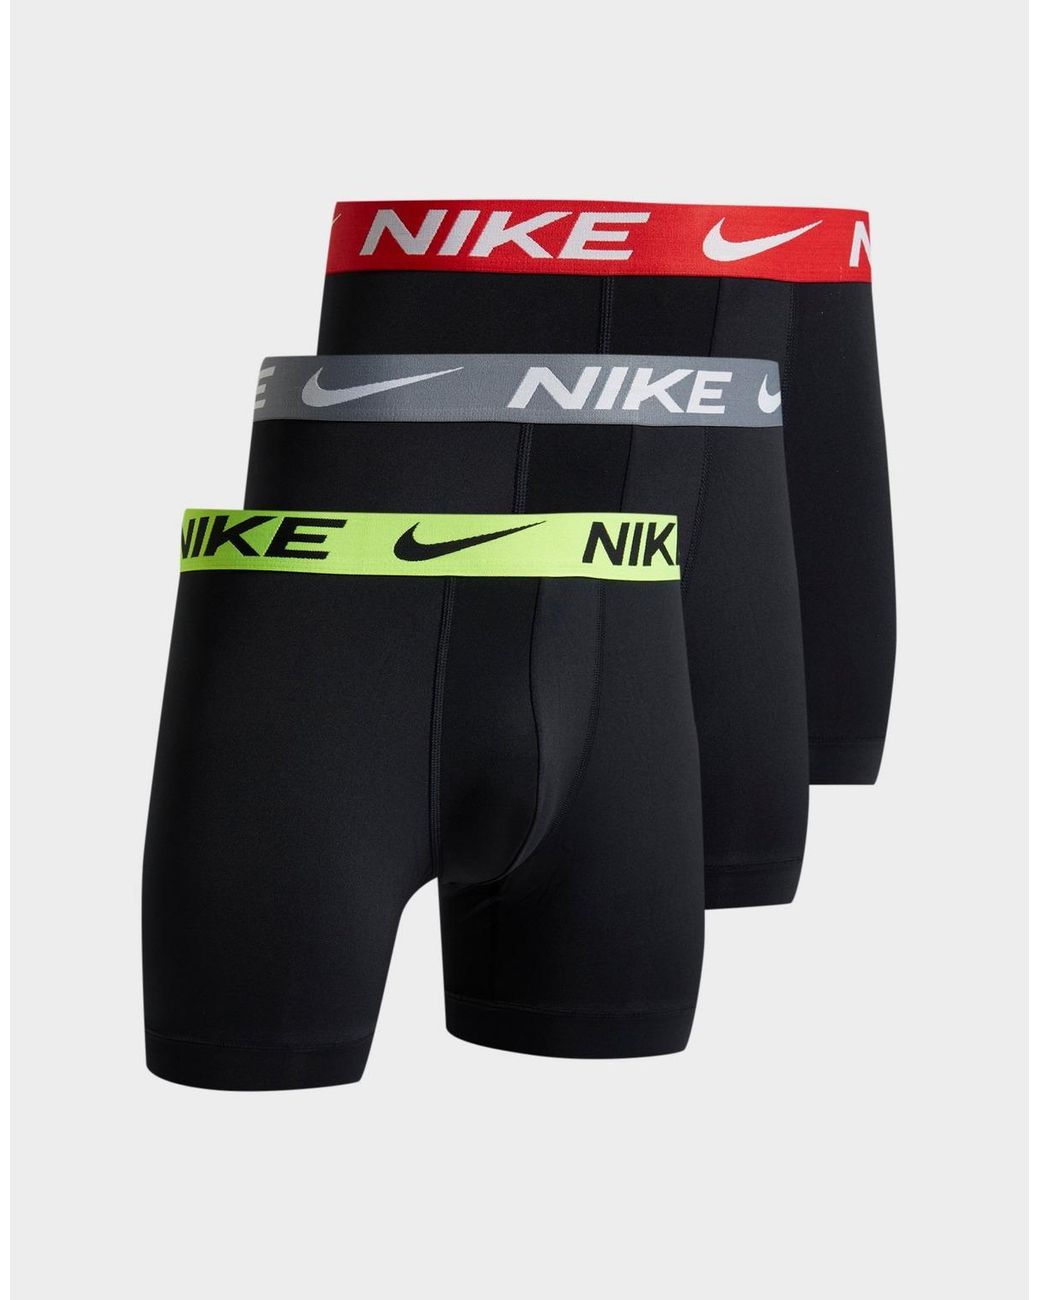 Nike Cotton 3-pack Boxers in Black for Men - Lyst